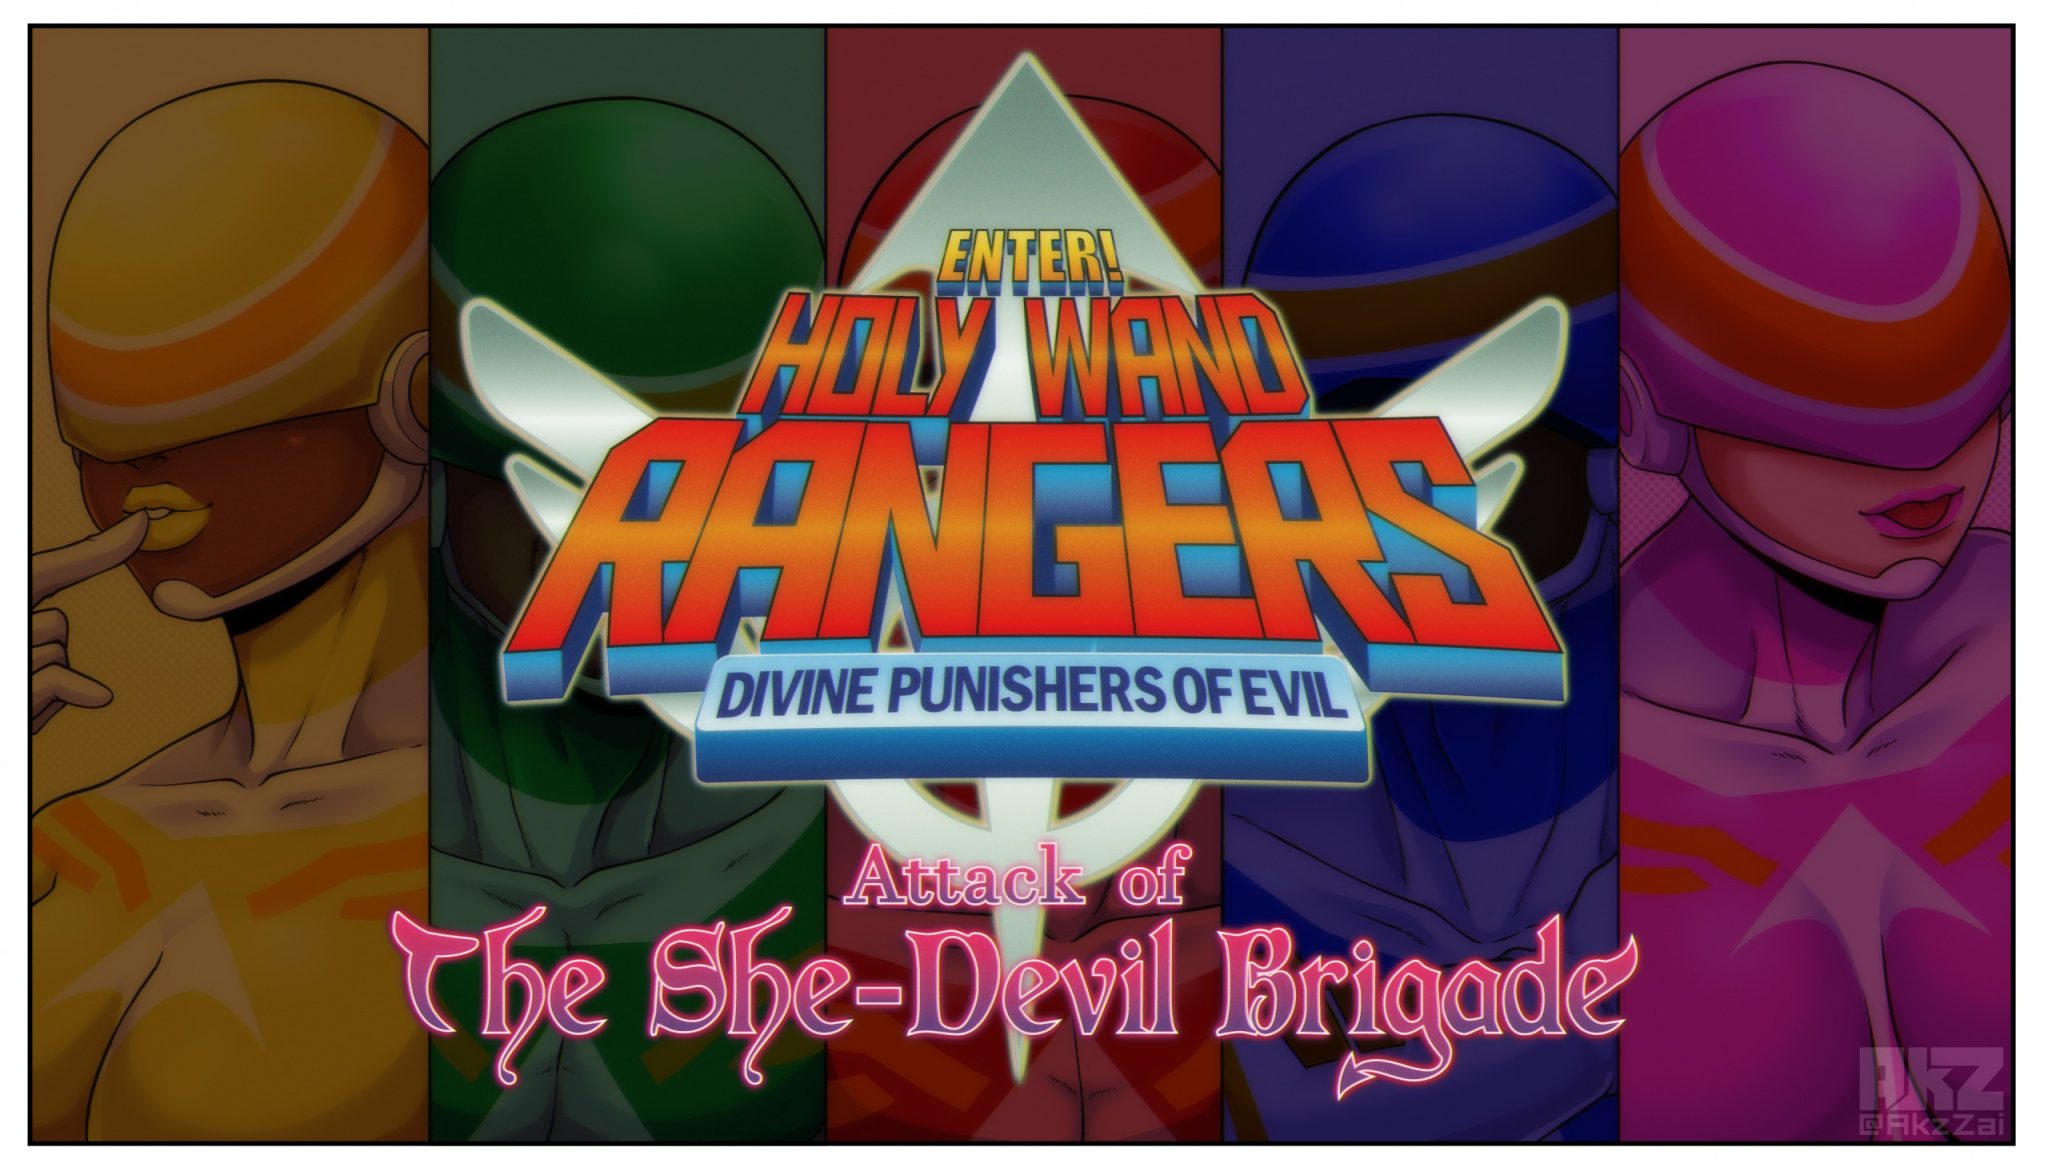 Enter! Holy Wand Rangers – Attack of The She-Devil Brigade